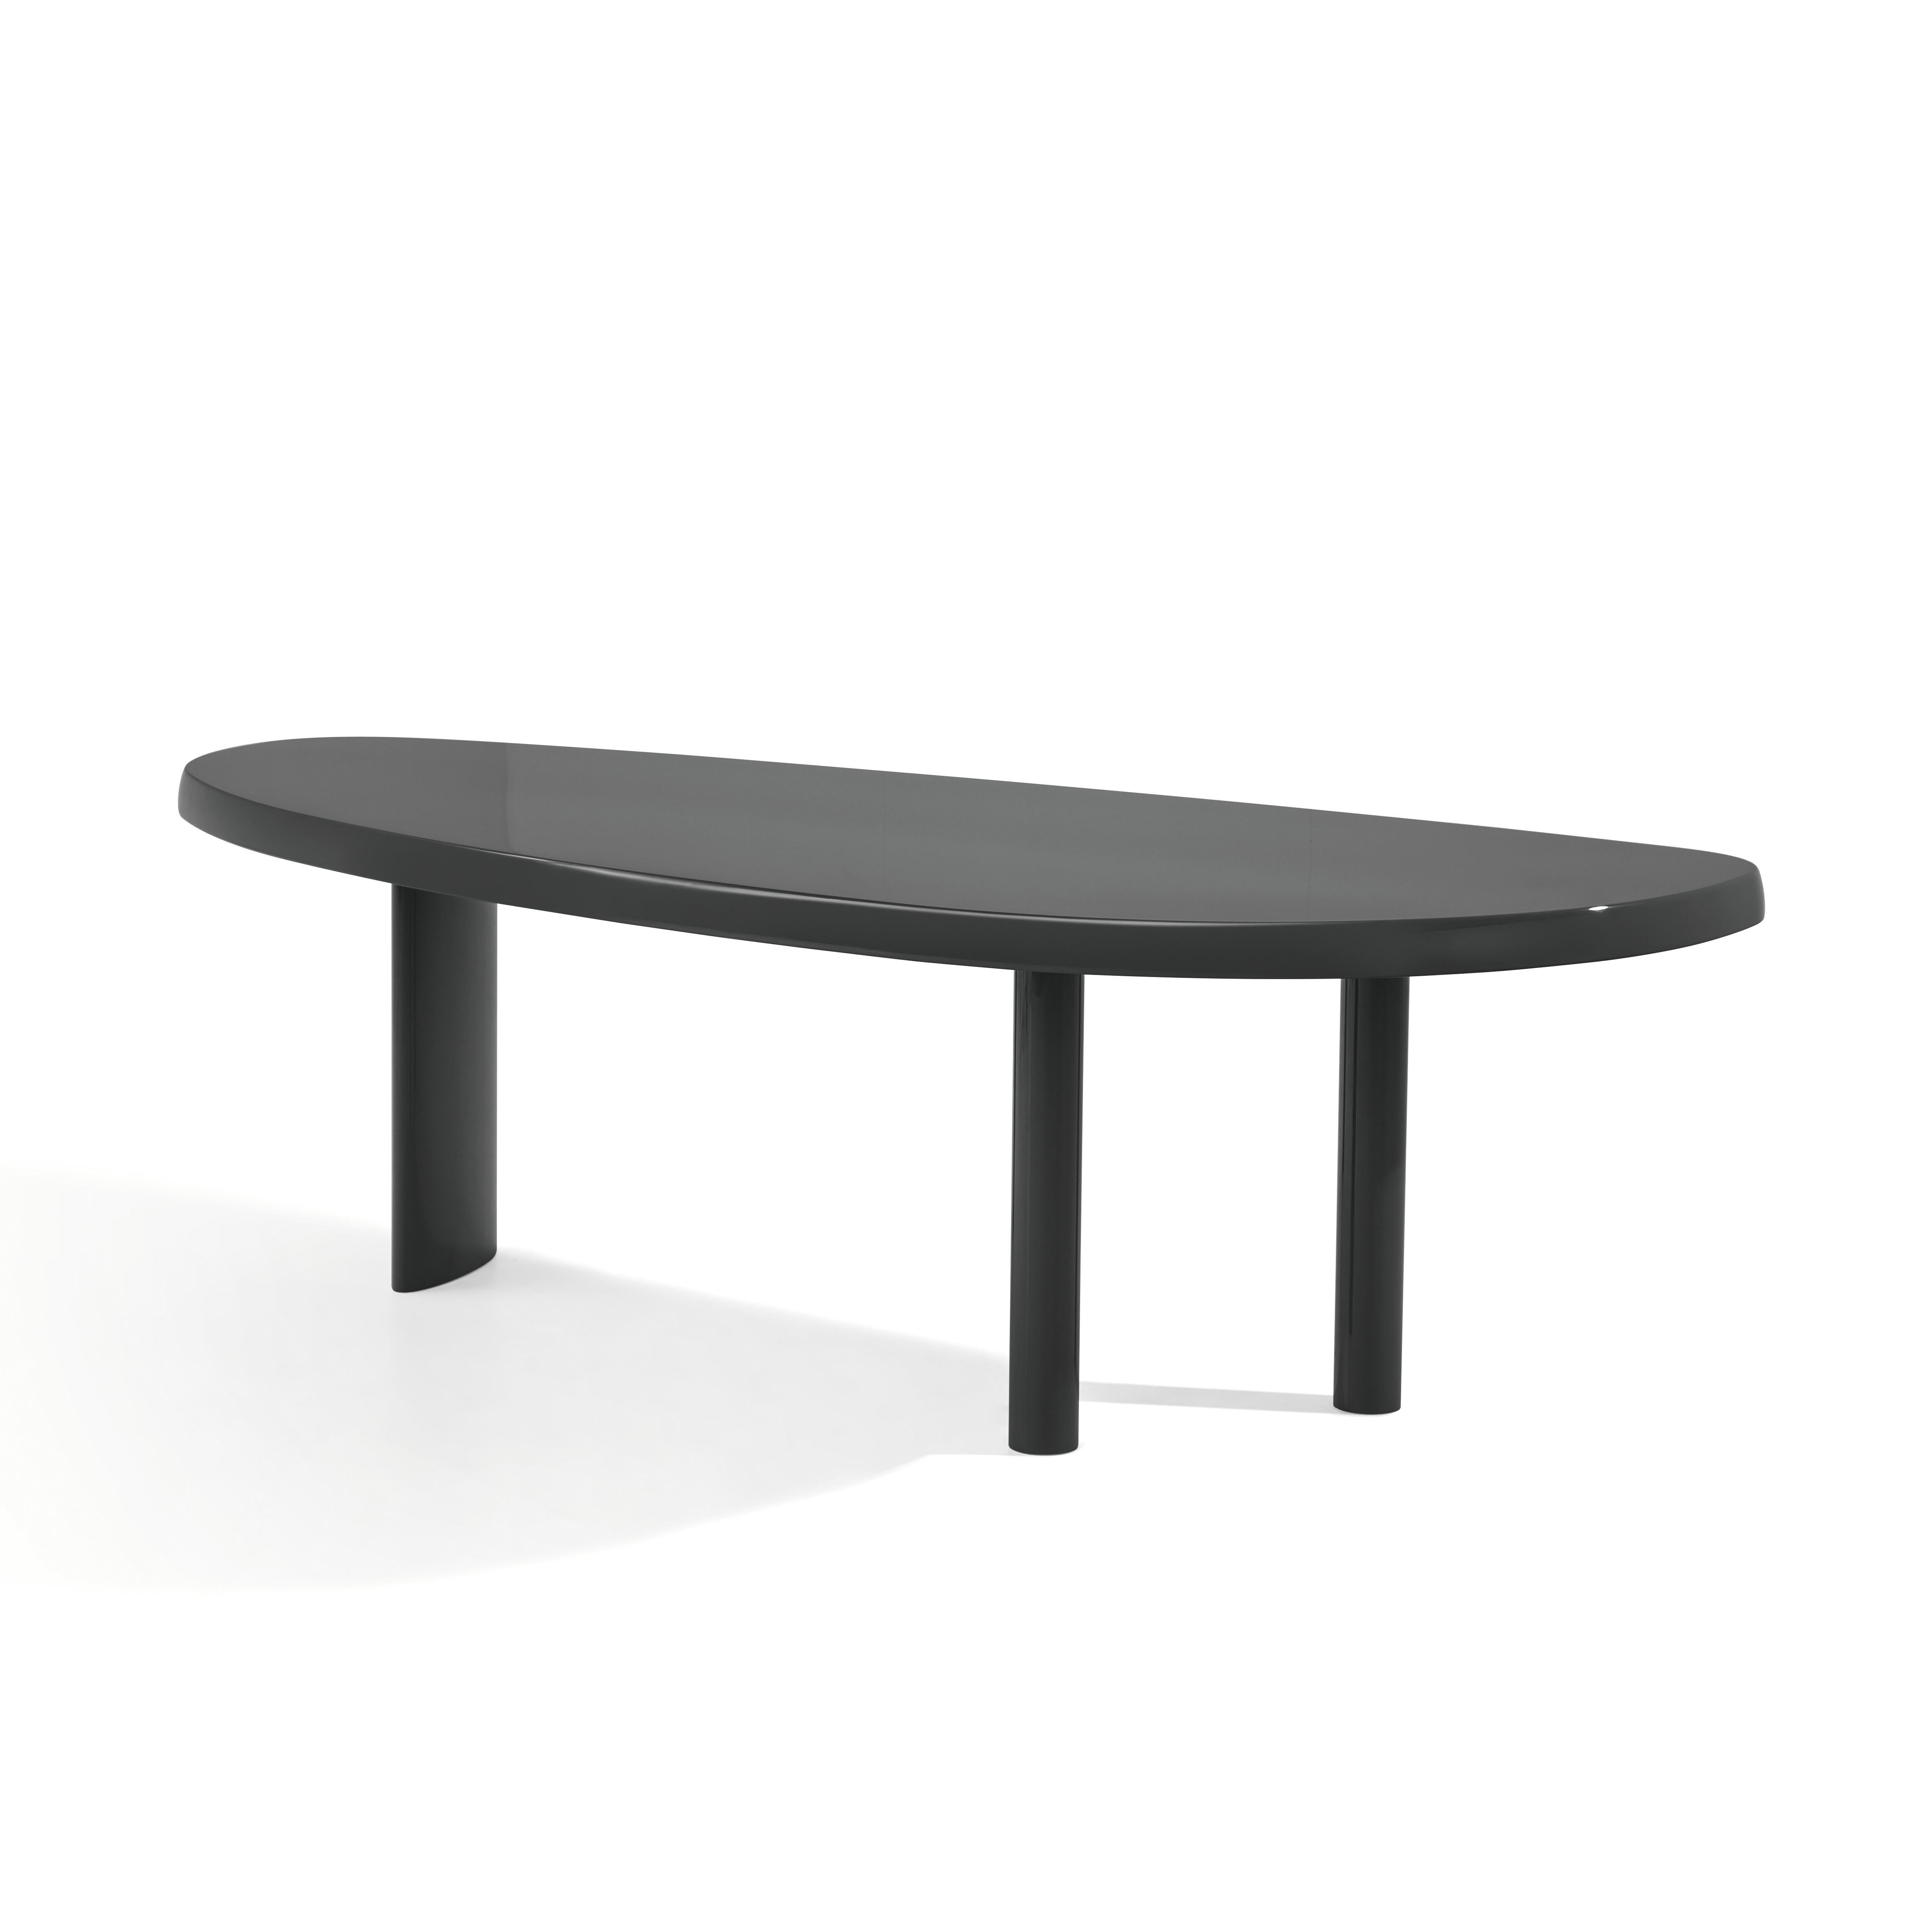 Forme libre table in black lacquered designed by Charlotte Perriand in 1959. Relaunched by Cassina in 2011.
Manufactured by Cassina in Italy.

Charlotte Perriand started work on the tables en forme libre in 1938. Originally intended for her own